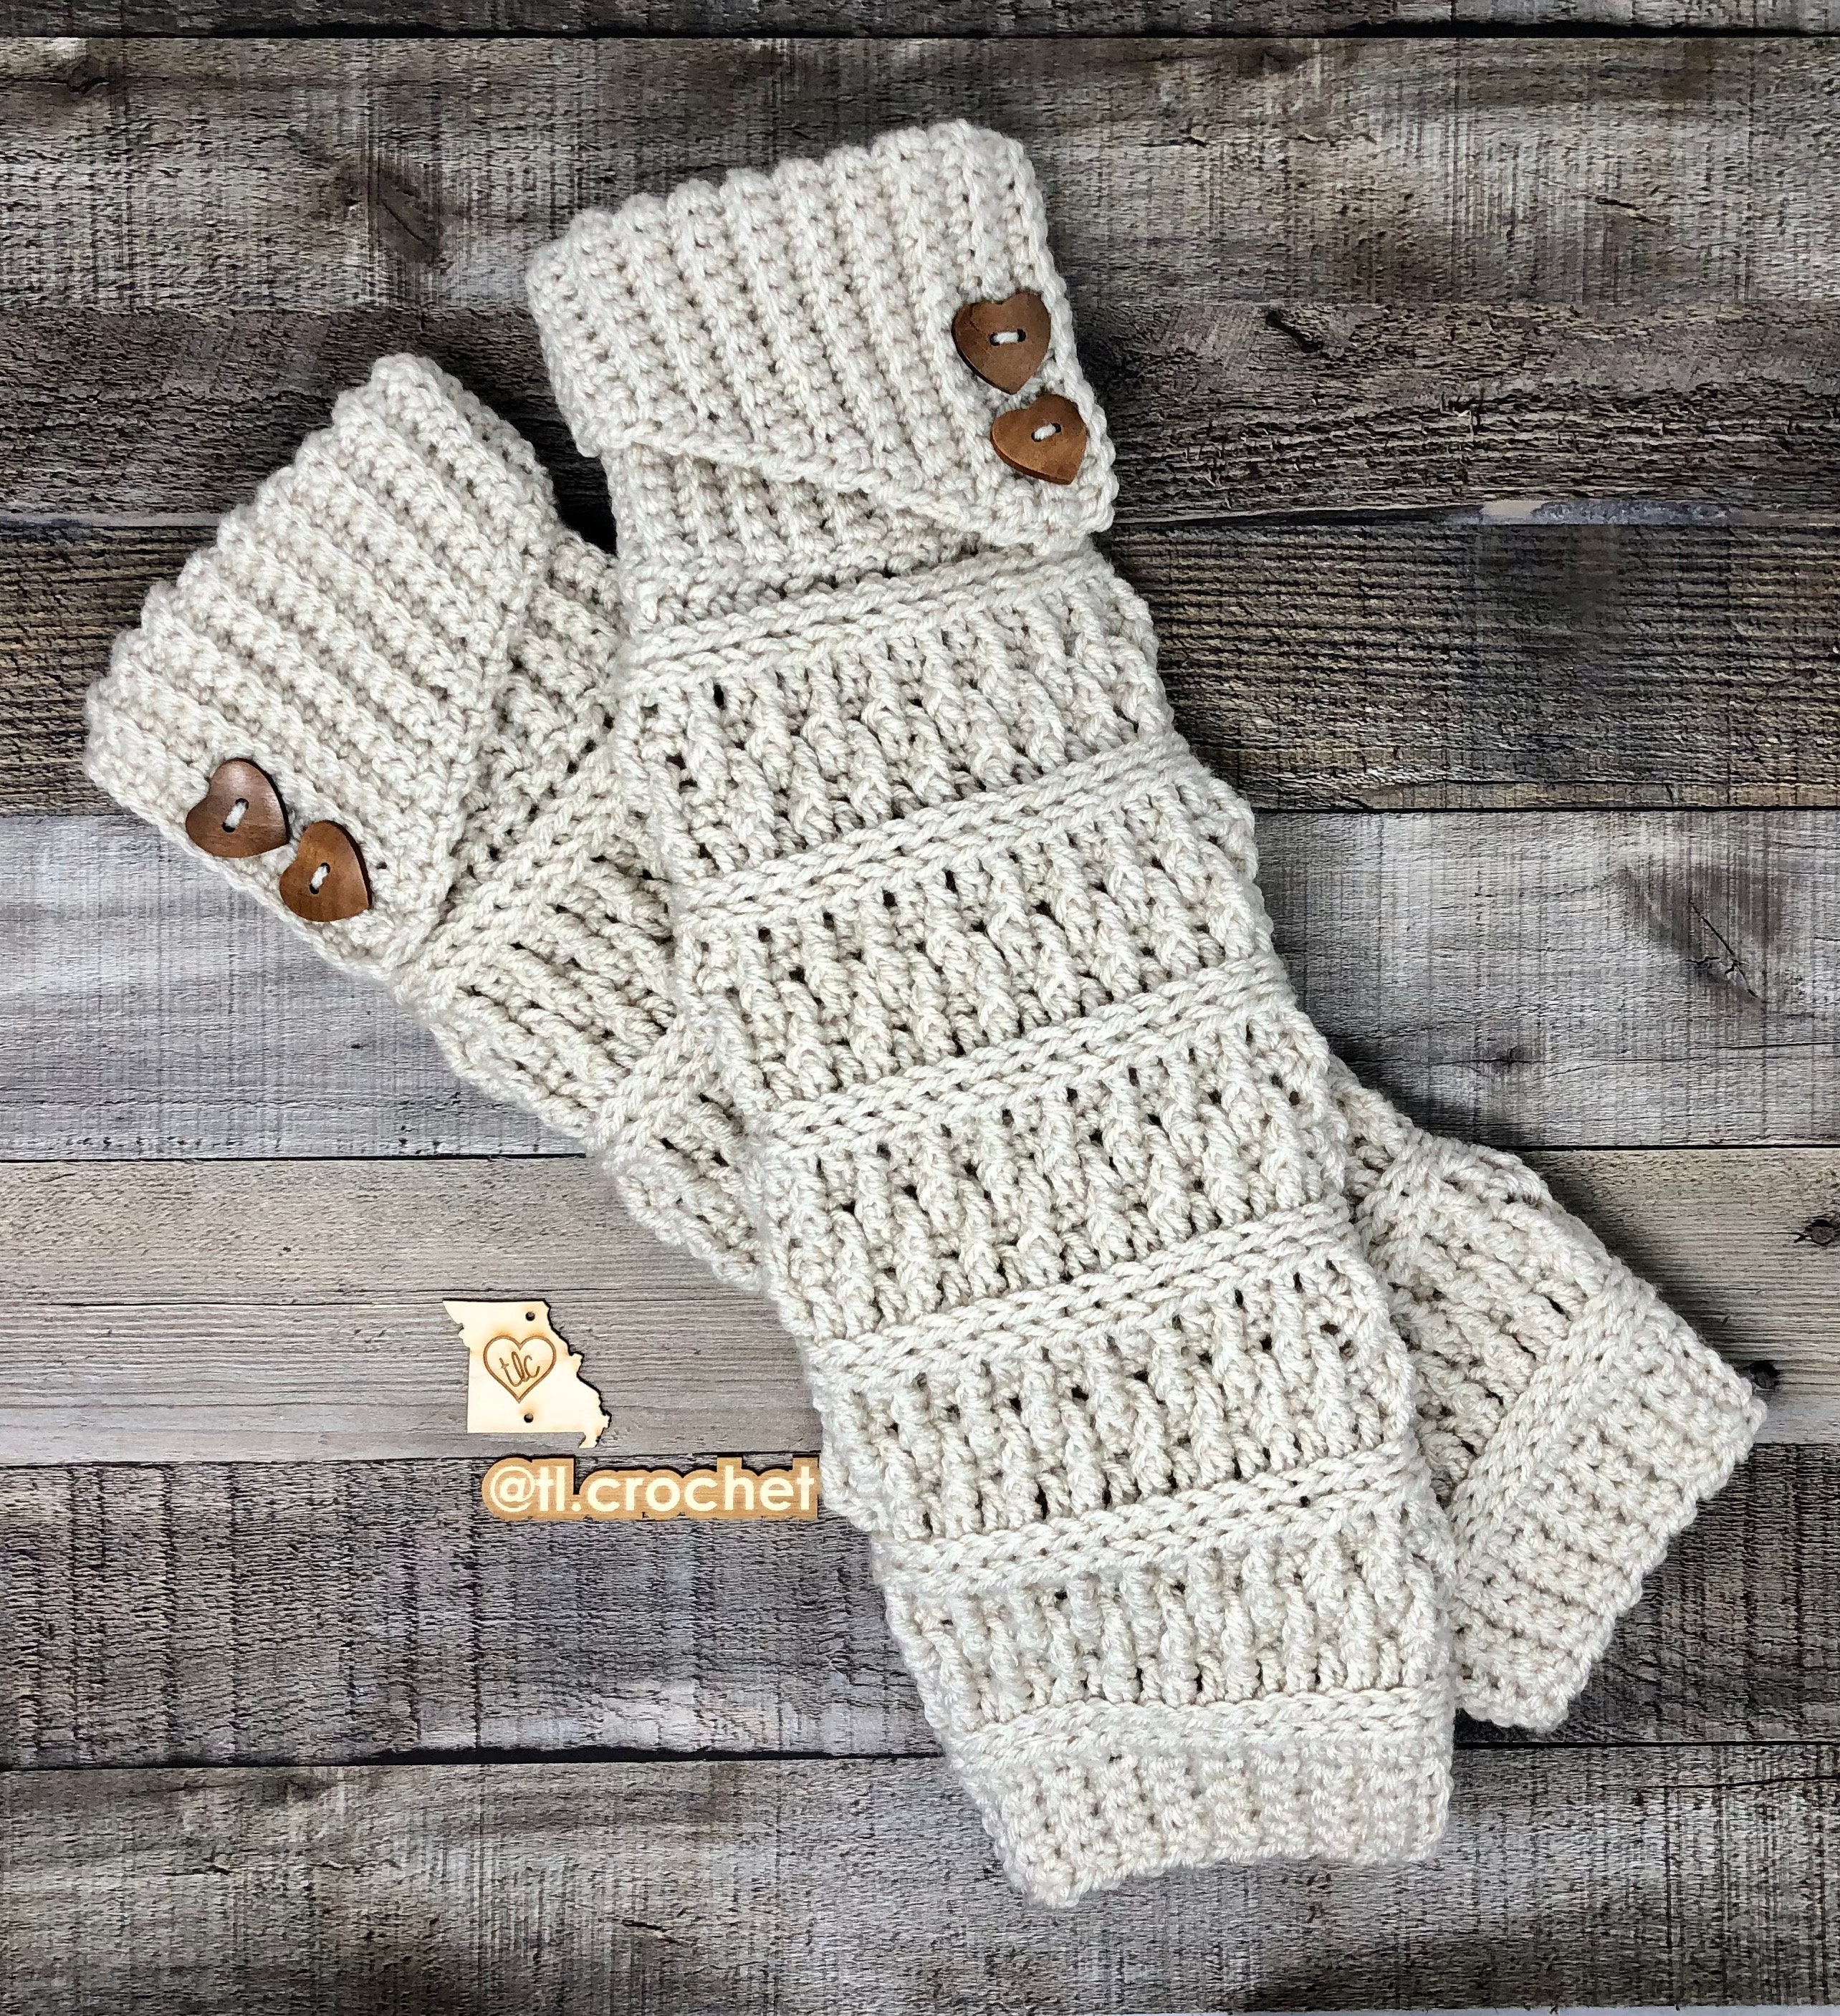 Turnberry Leg Warmers, Crochet PDF Digital Download Pattern, Decorative  Buttons, Mommy and Me, Crochet Leg Warmers, Leg Warmers Pattern 